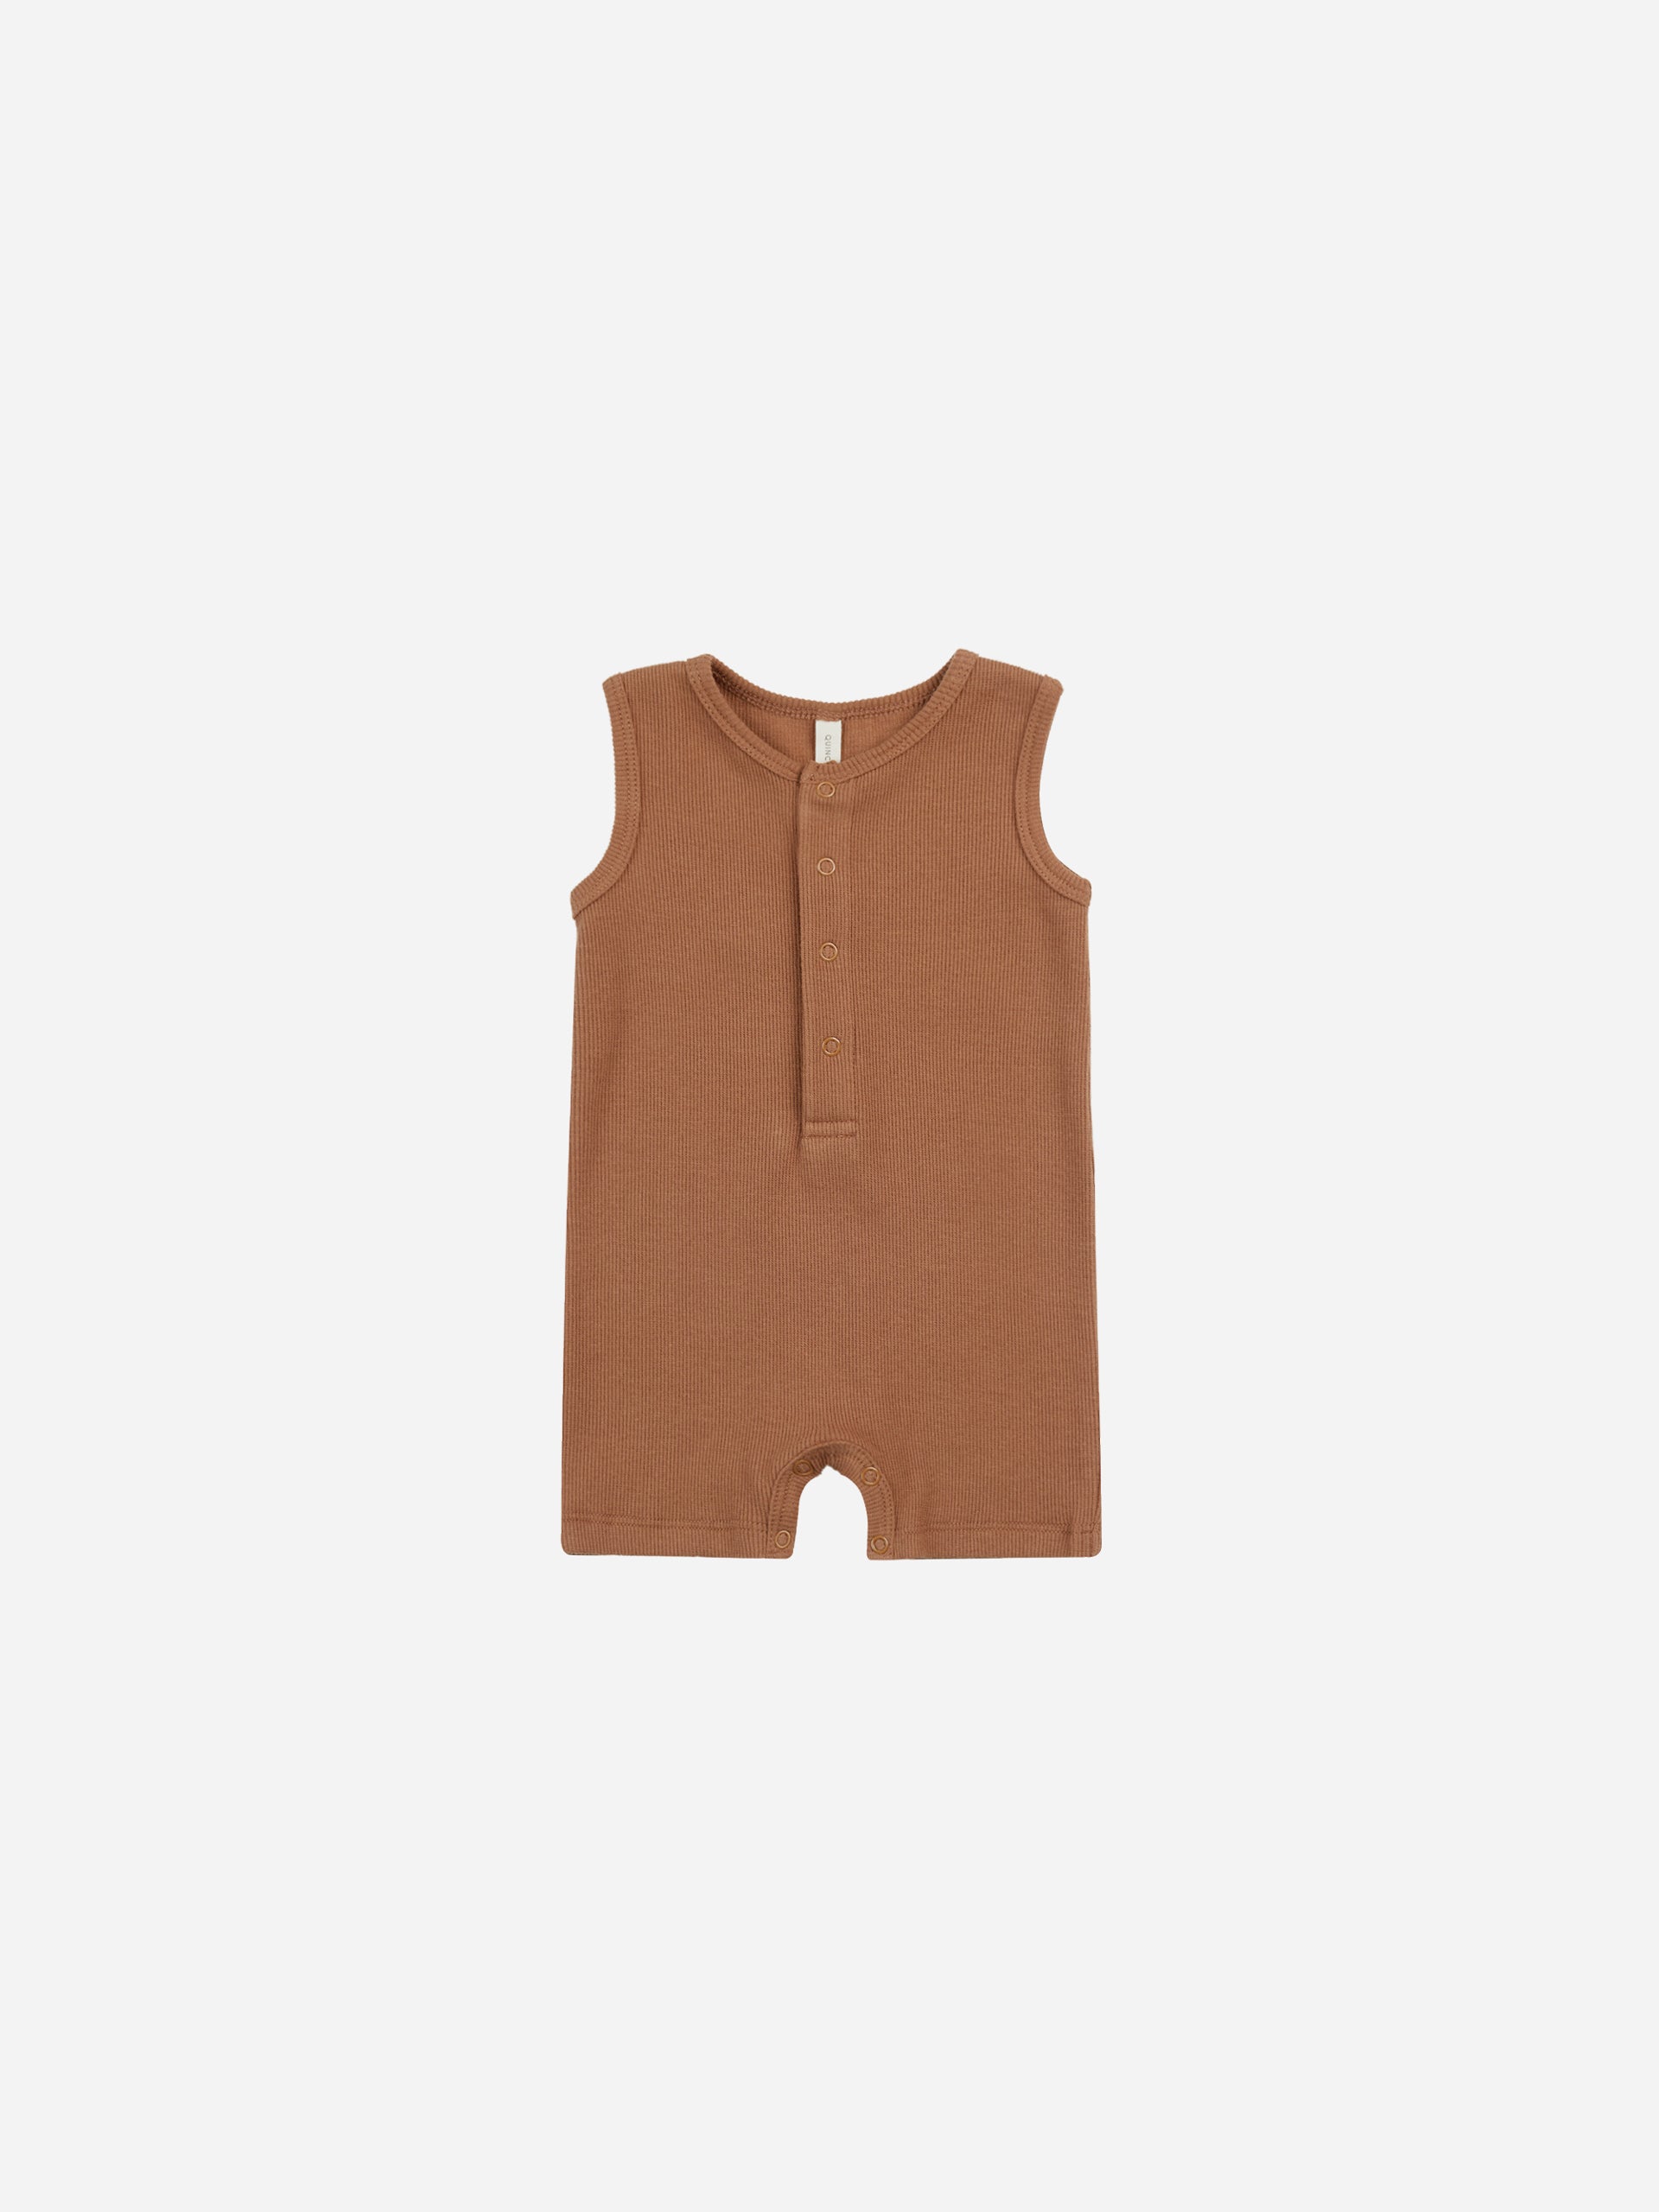 Ribbed Henley Romper || Clay - Rylee + Cru | Kids Clothes | Trendy Baby Clothes | Modern Infant Outfits |